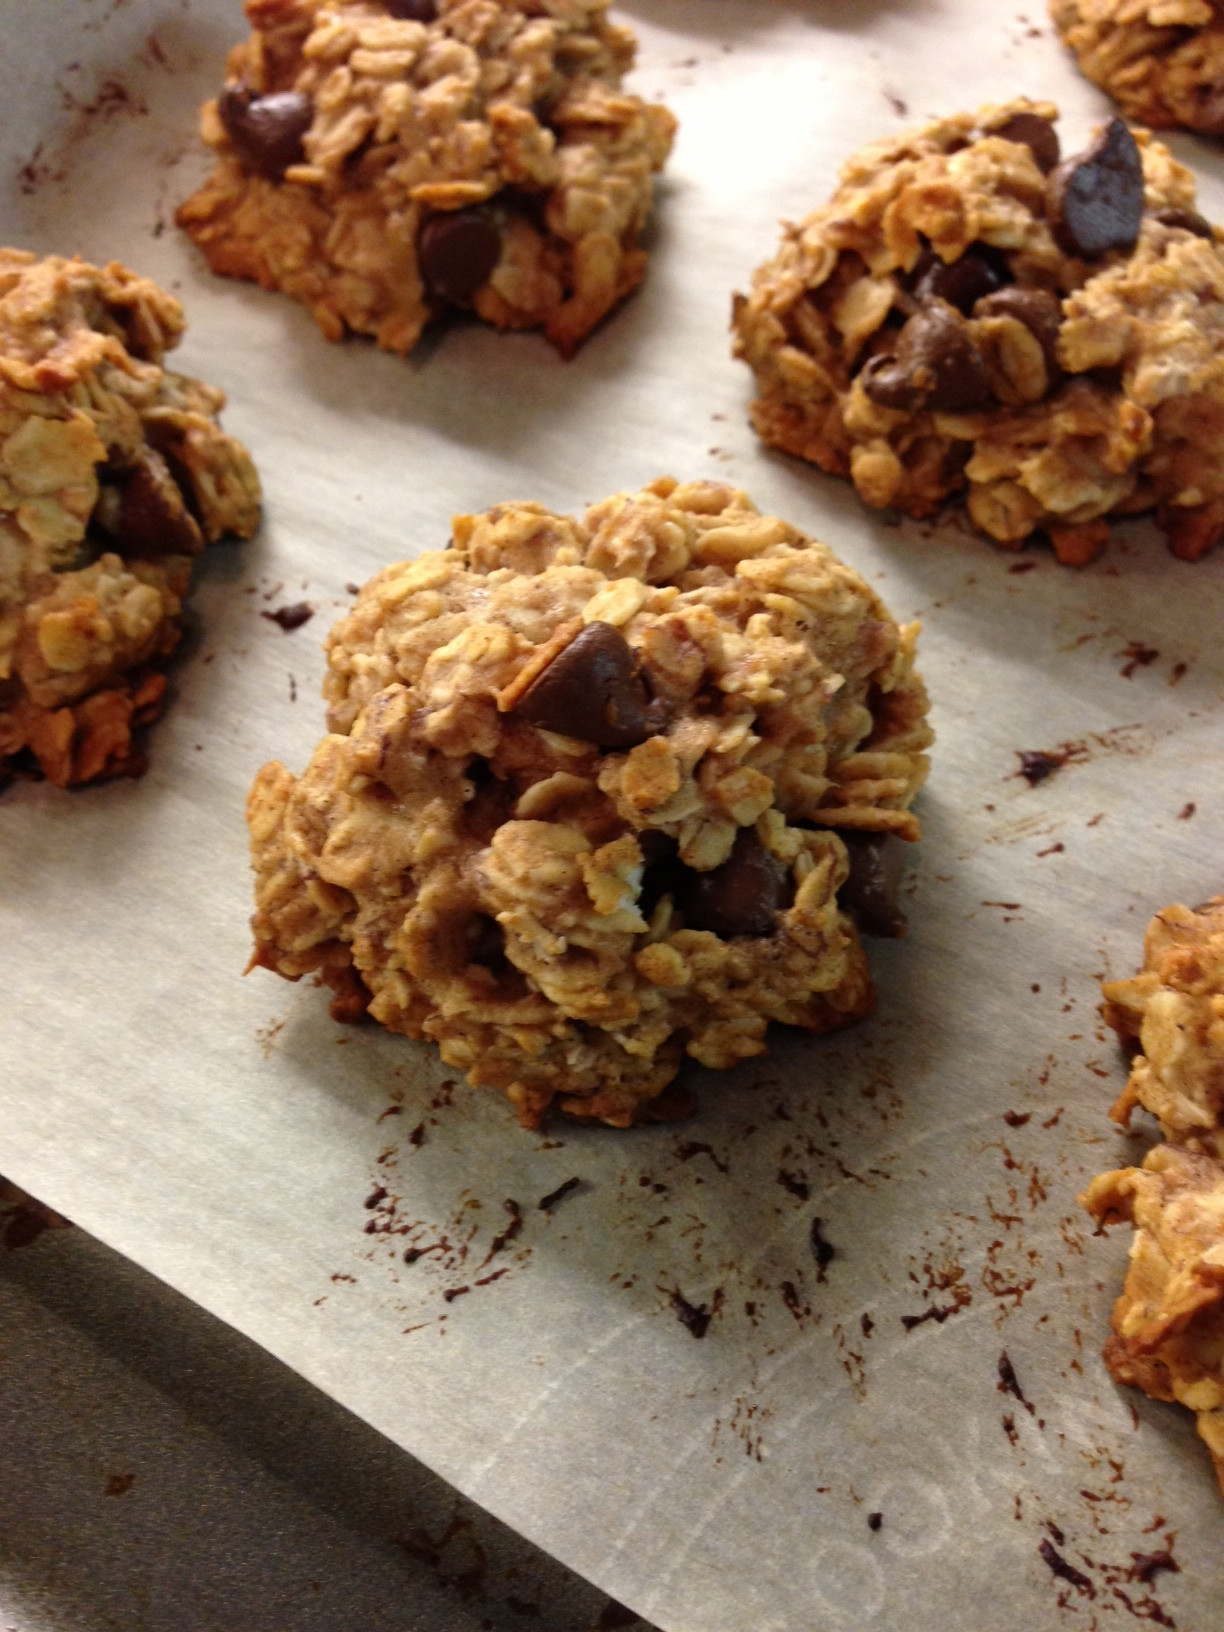 Healthy Oatmeal Coconut Chocolate Chip Cookies
 Healthy Oatmeal Chocolate Chip Cookies Lauren Follett